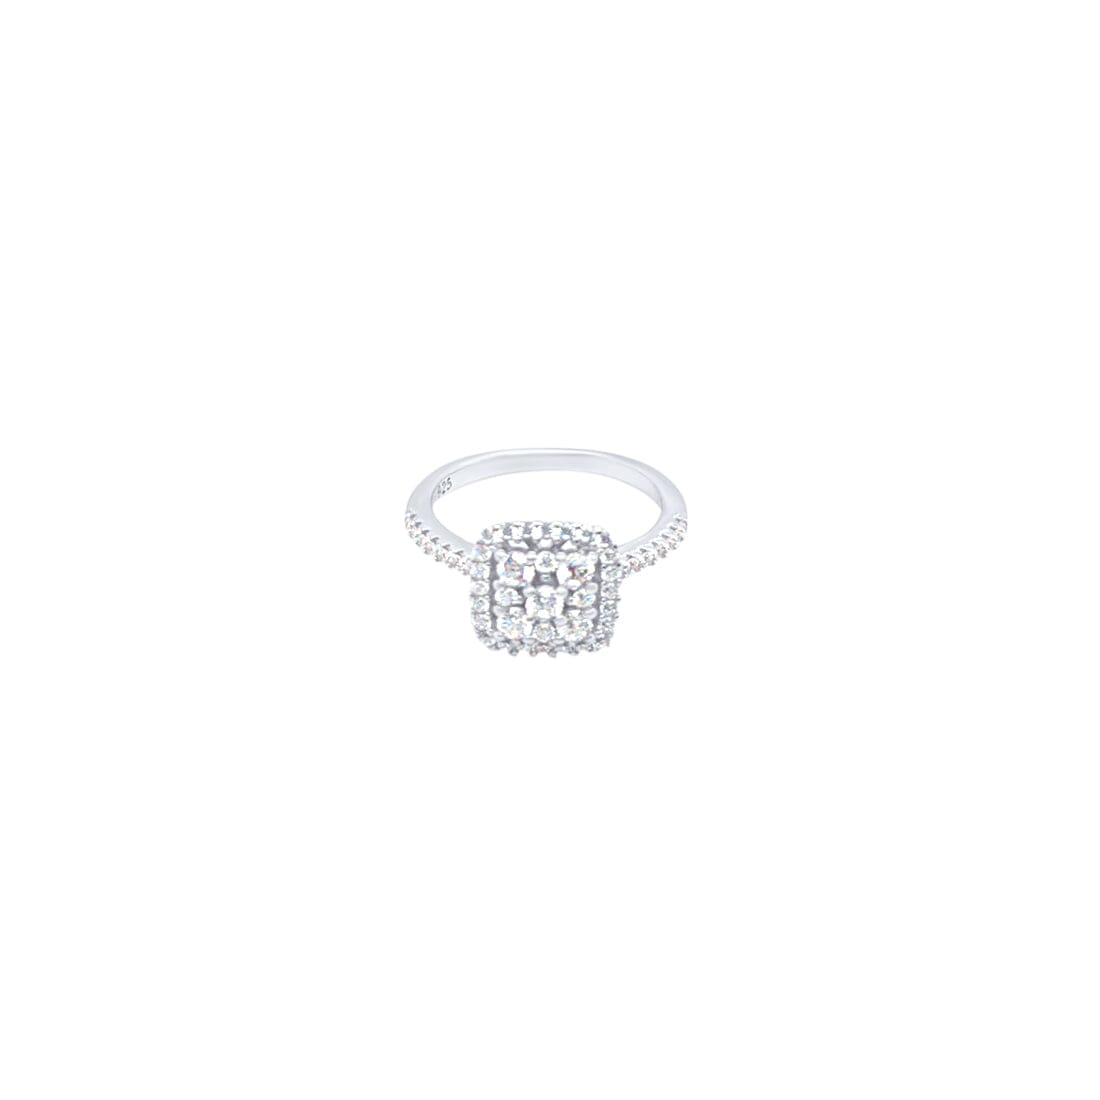 Halo Cushion Shaped Ring with Cubic Zirconia in Sterling Silver Rings Bevilles 